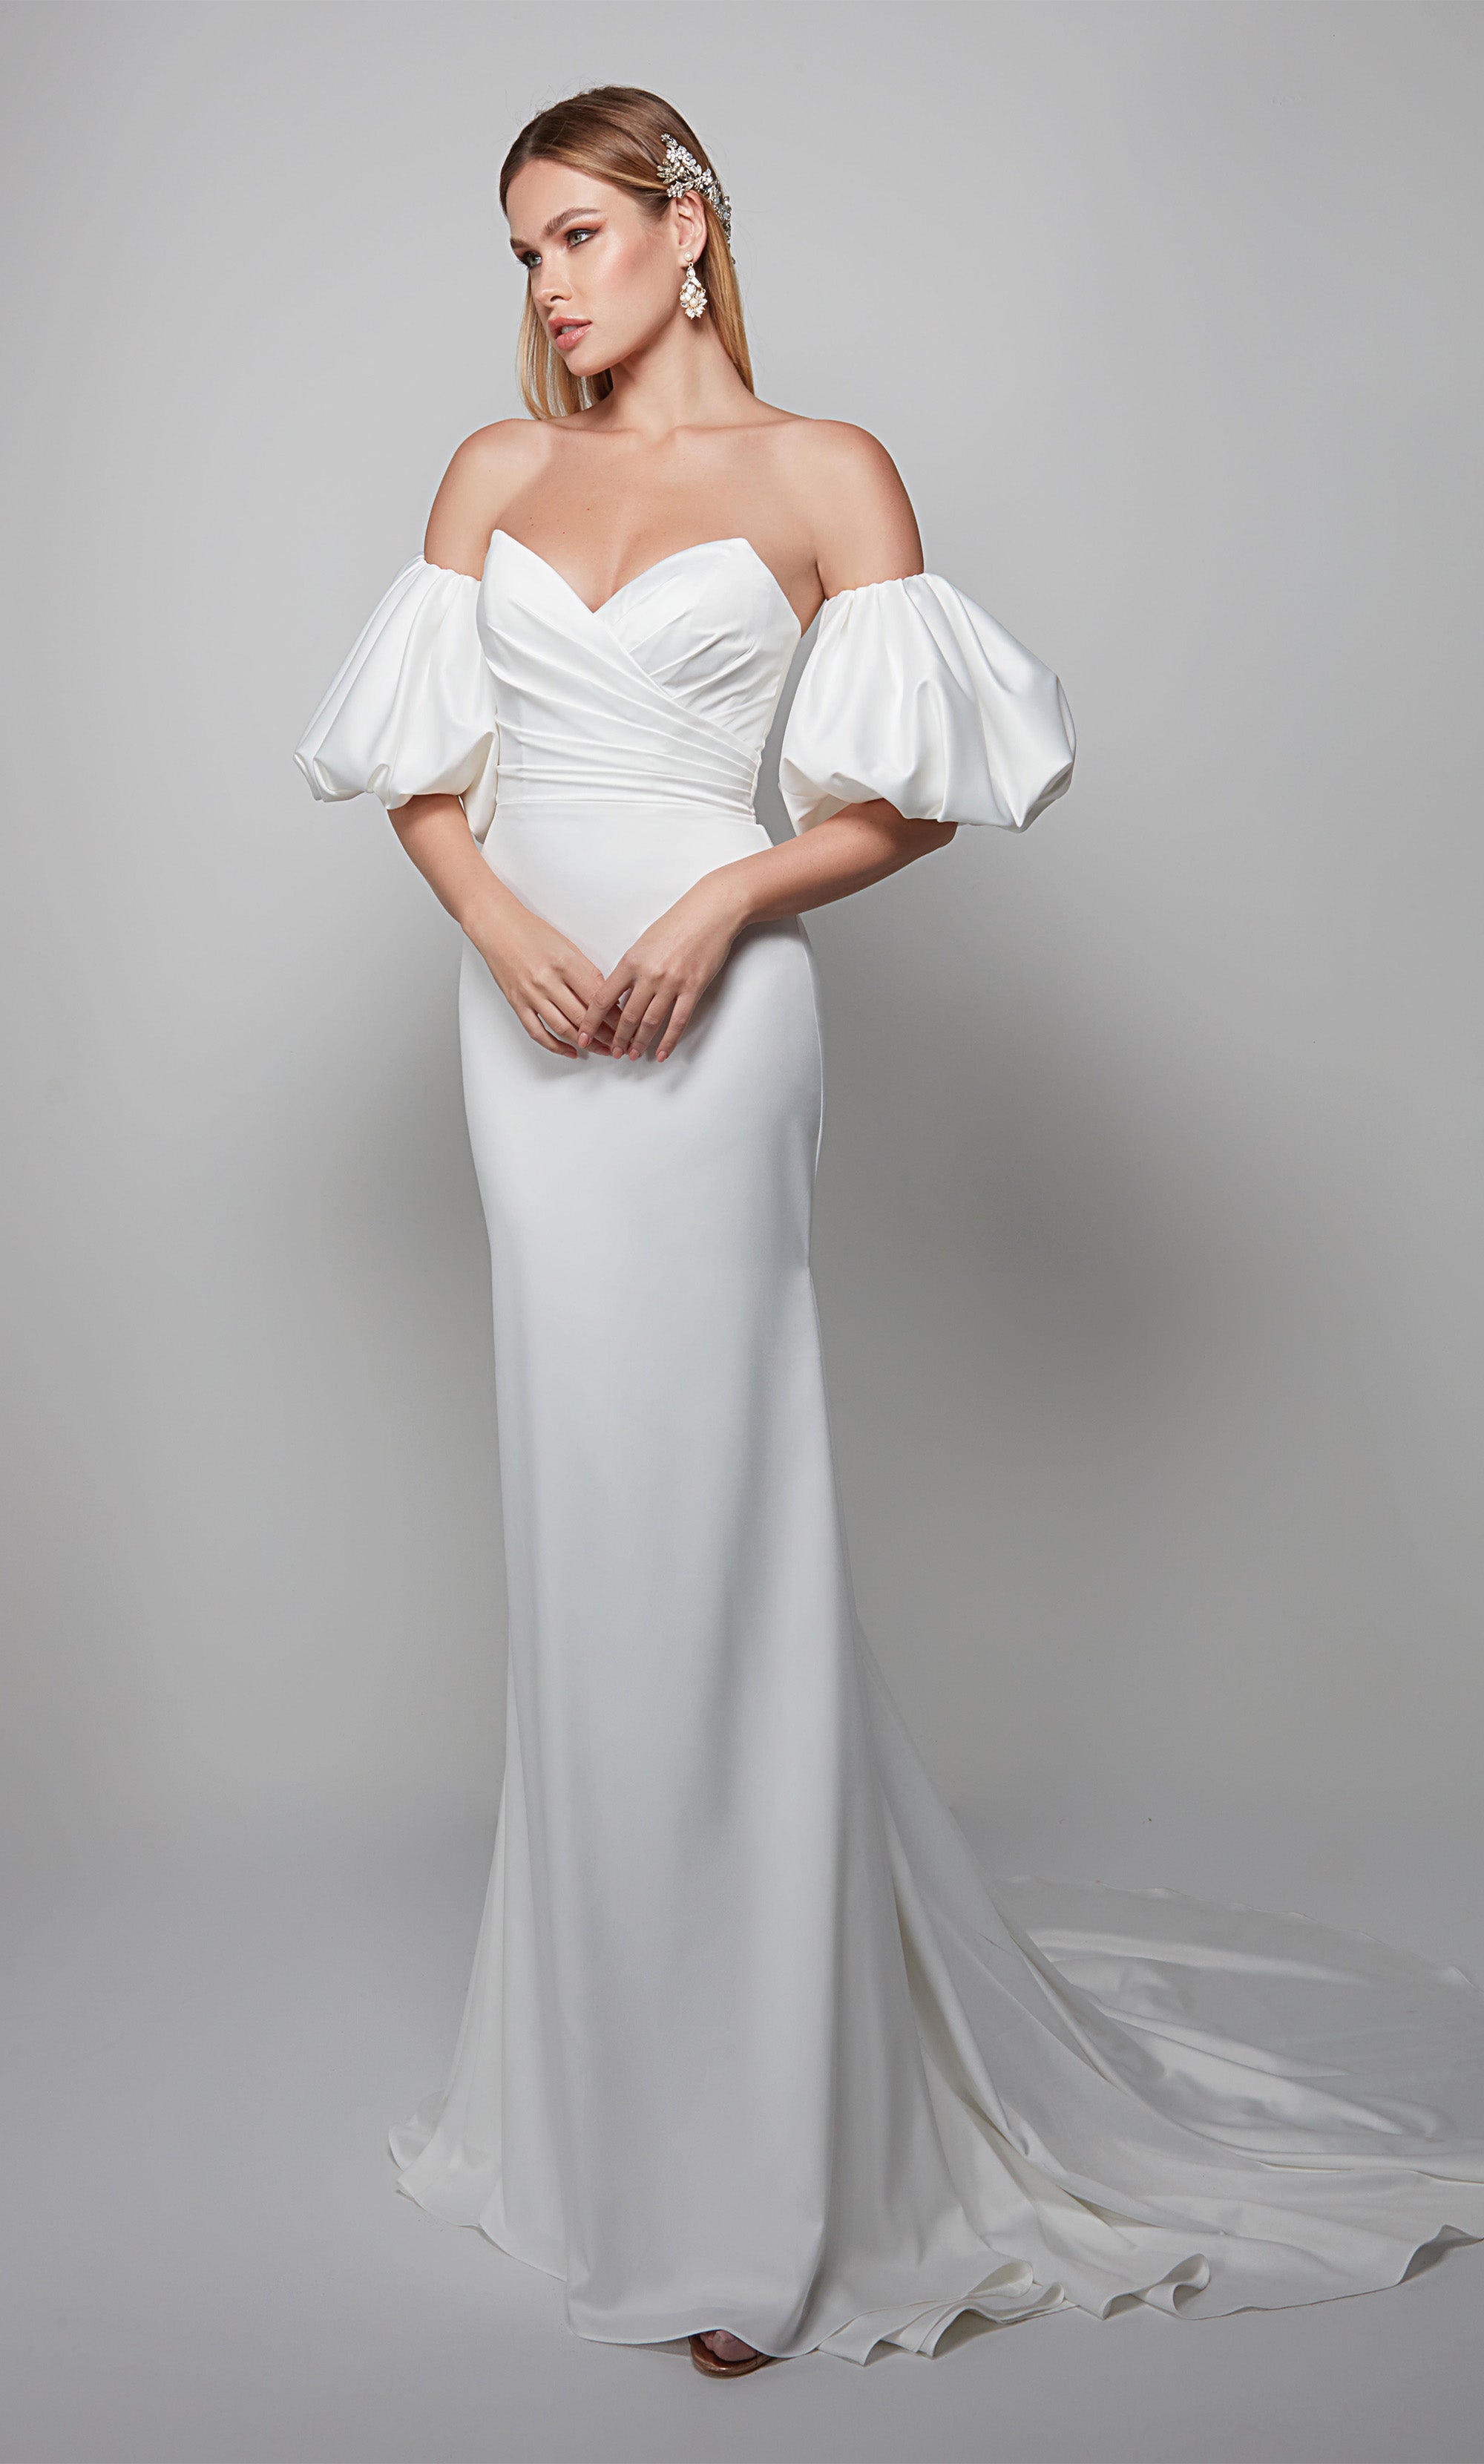 Sleek and sophisticated Satin, Fit n flare design  Simple wedding gowns,  Chic wedding dresses, Modern bridal gowns